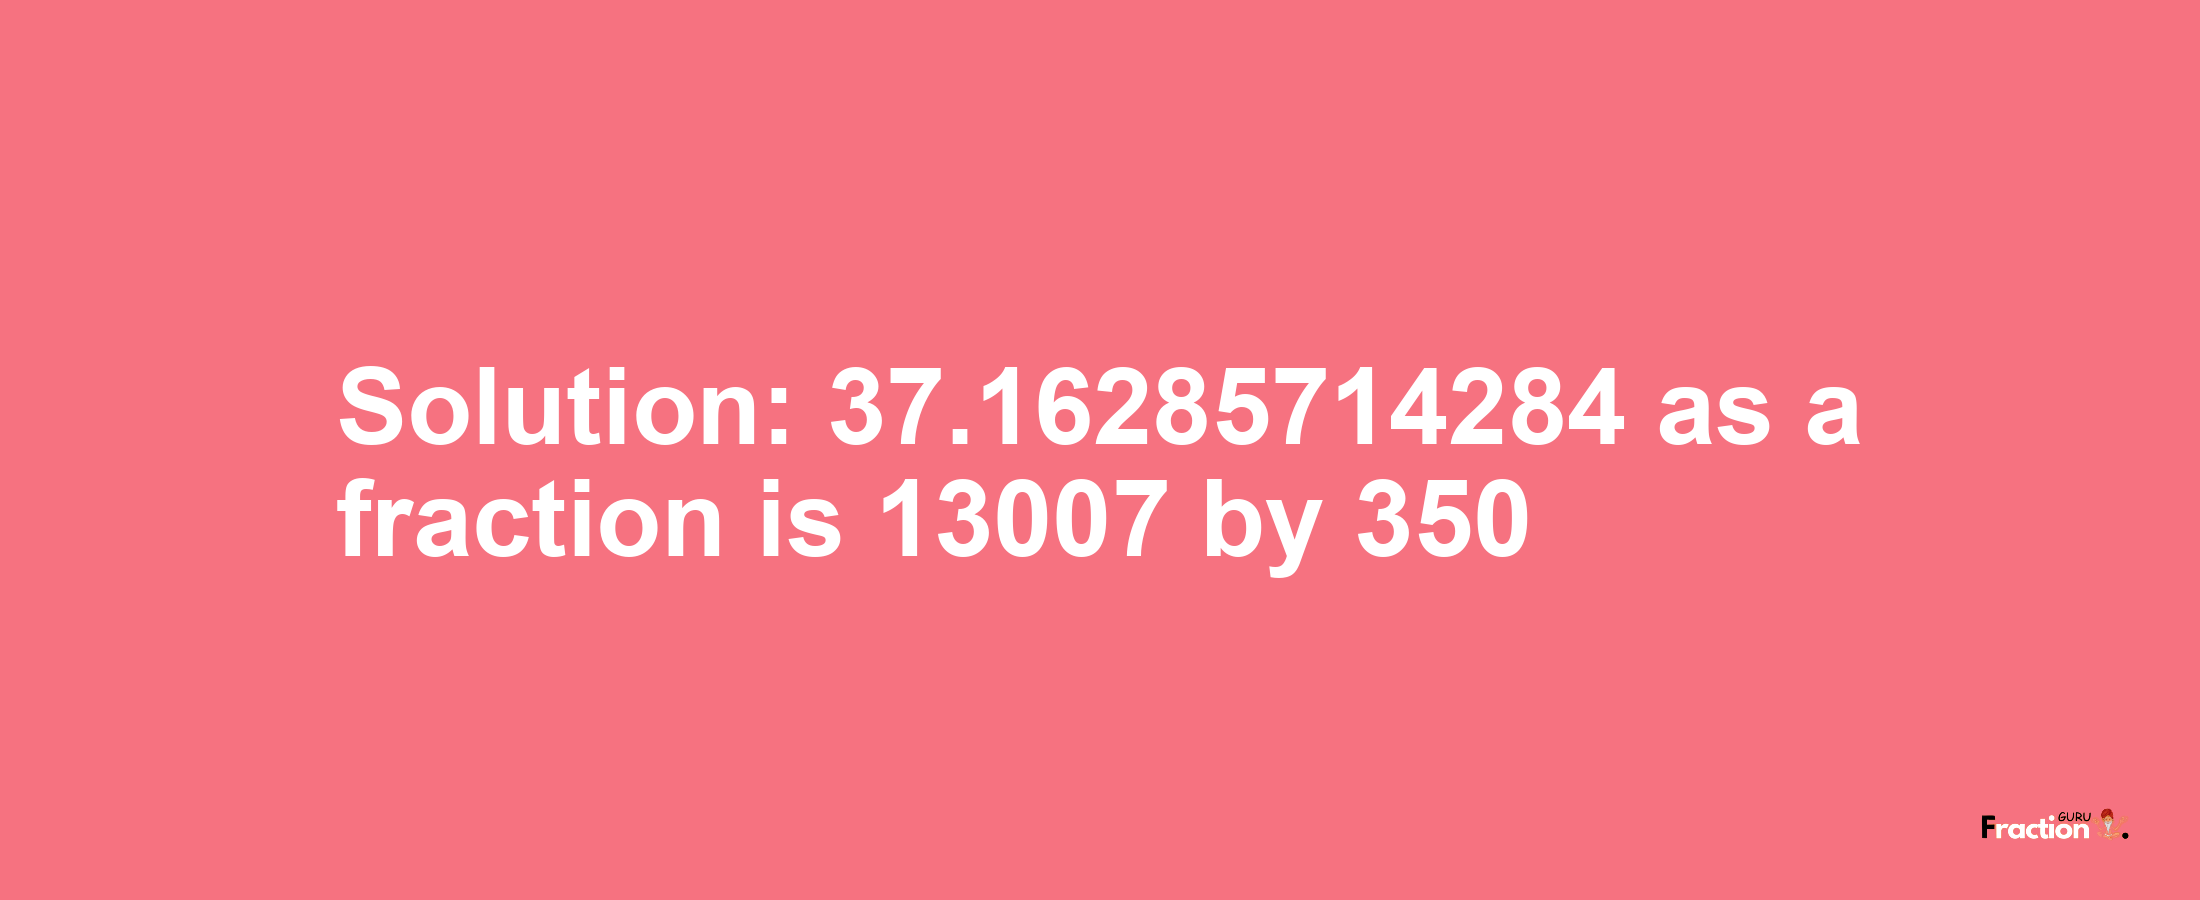 Solution:37.16285714284 as a fraction is 13007/350